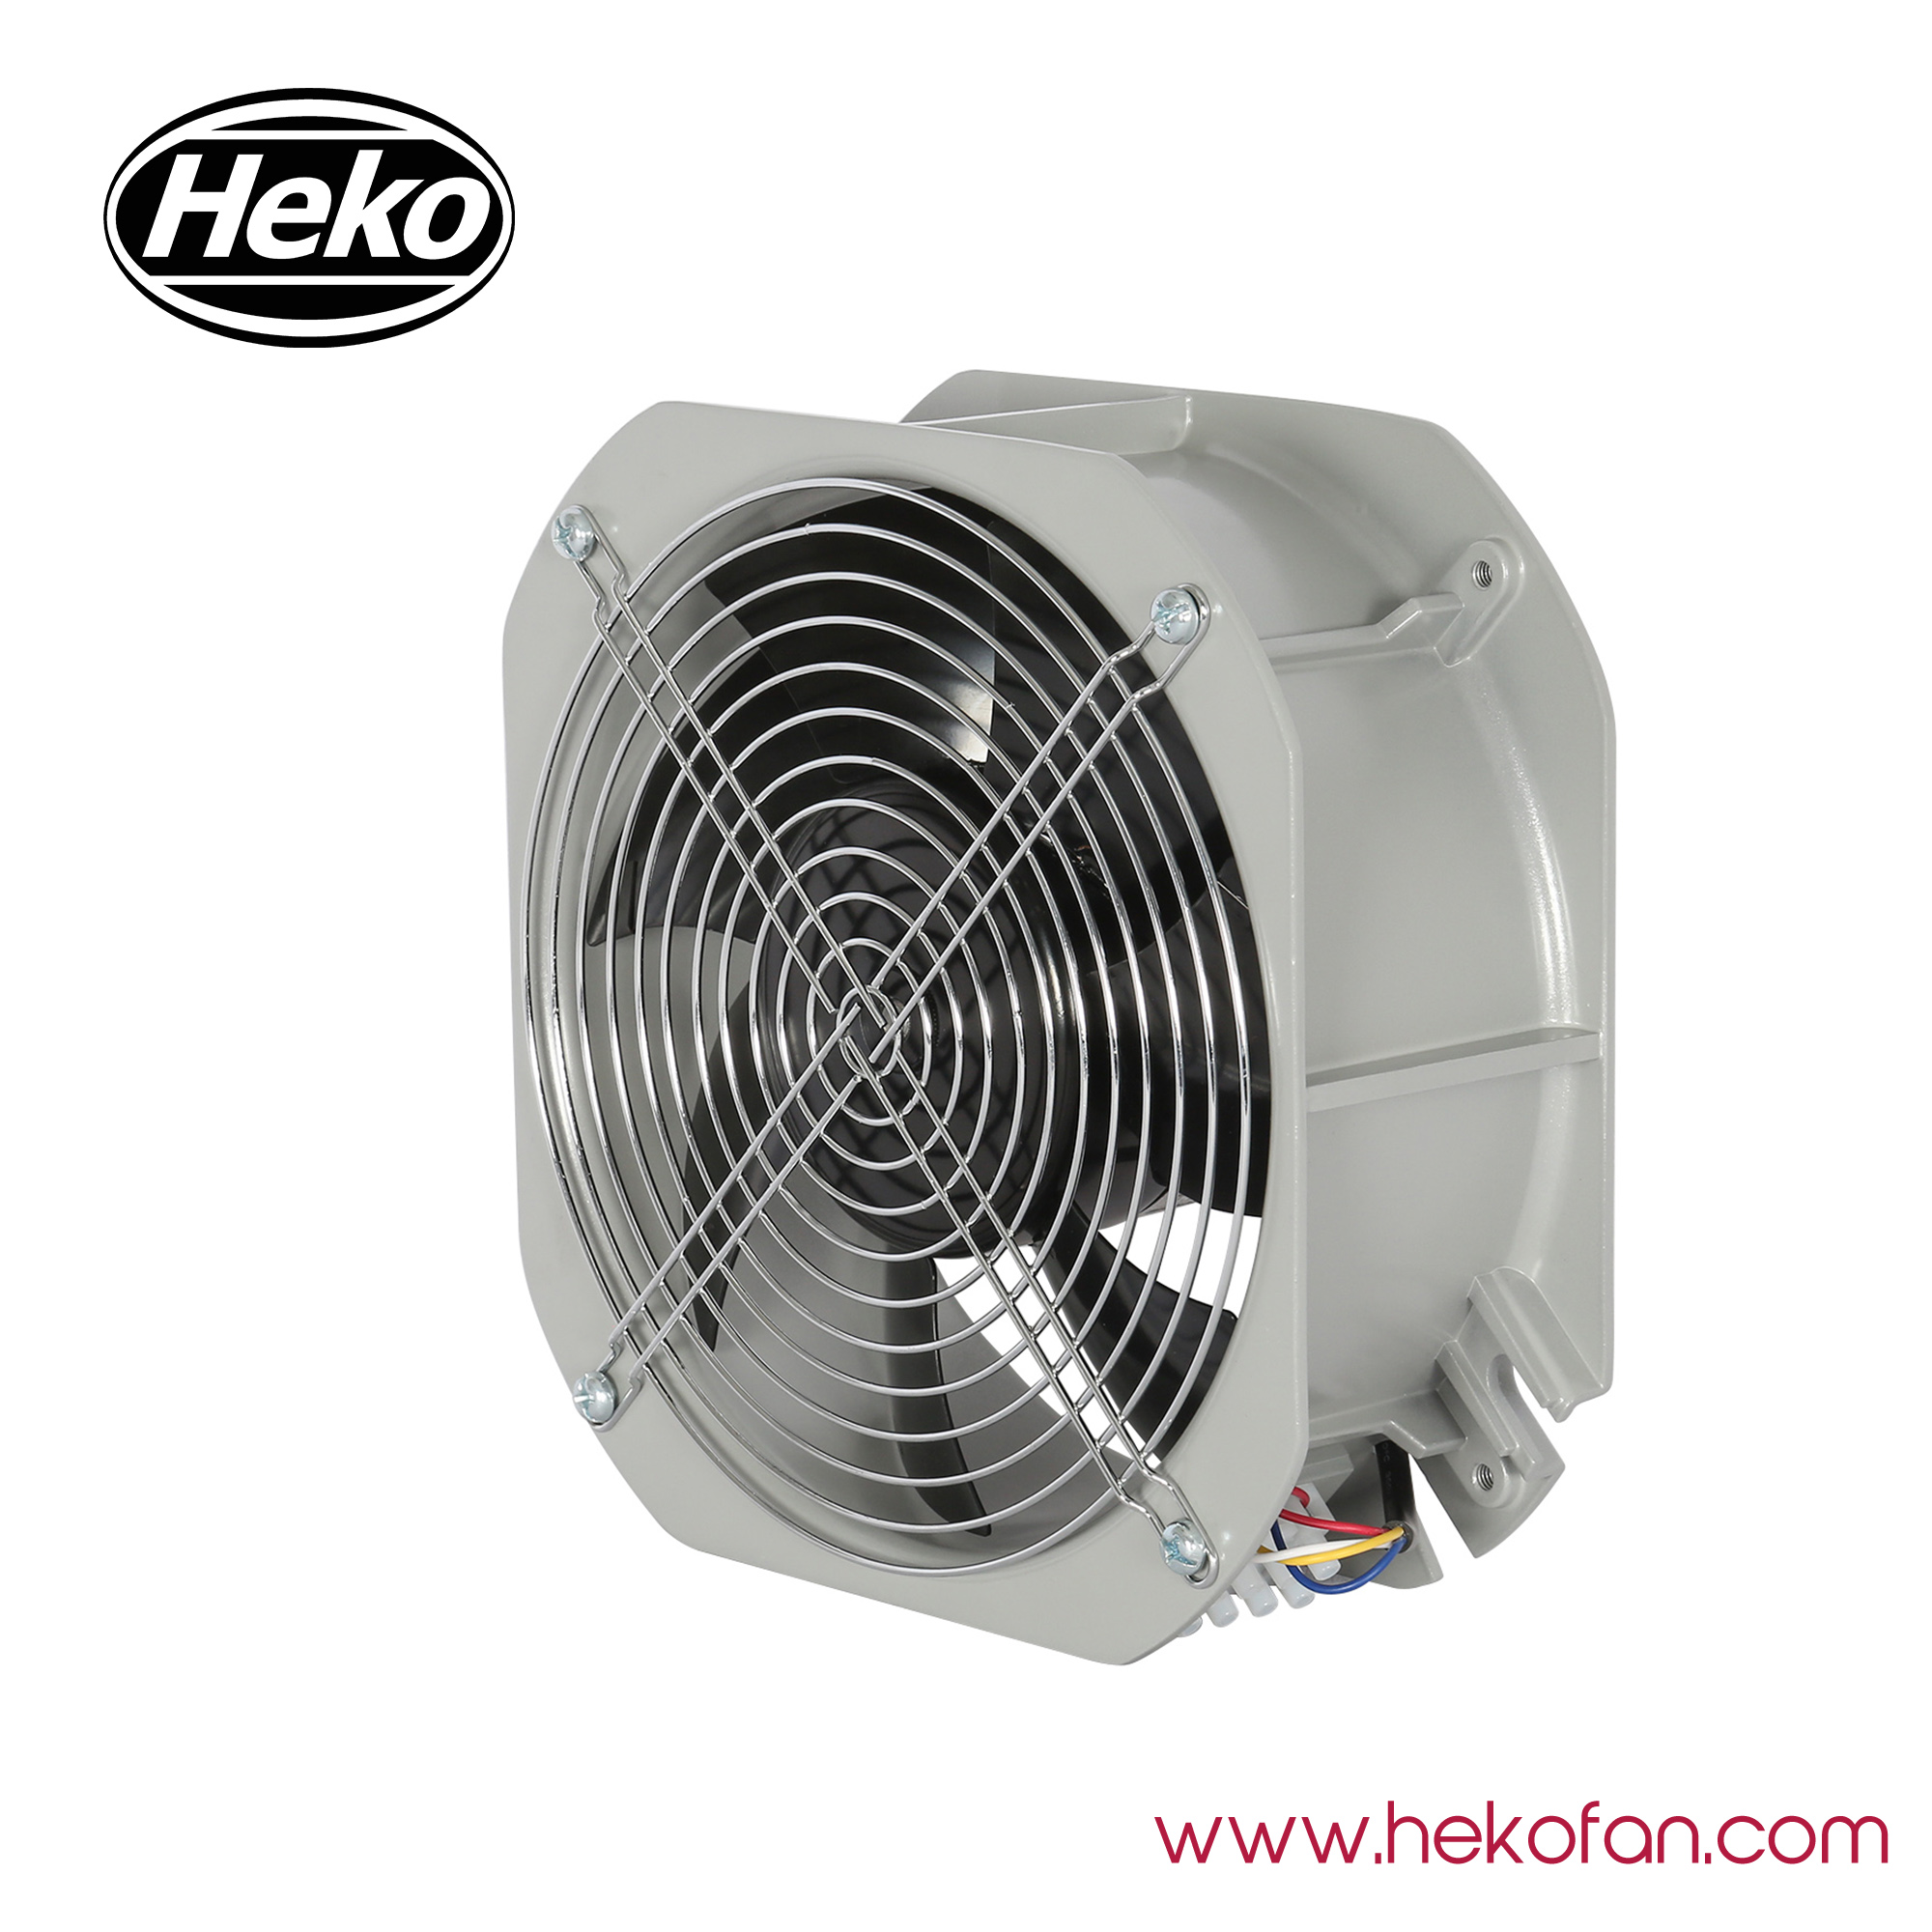 HEKO DC200mm 24V 48V Cooling Axial Fan For Greenhouses 